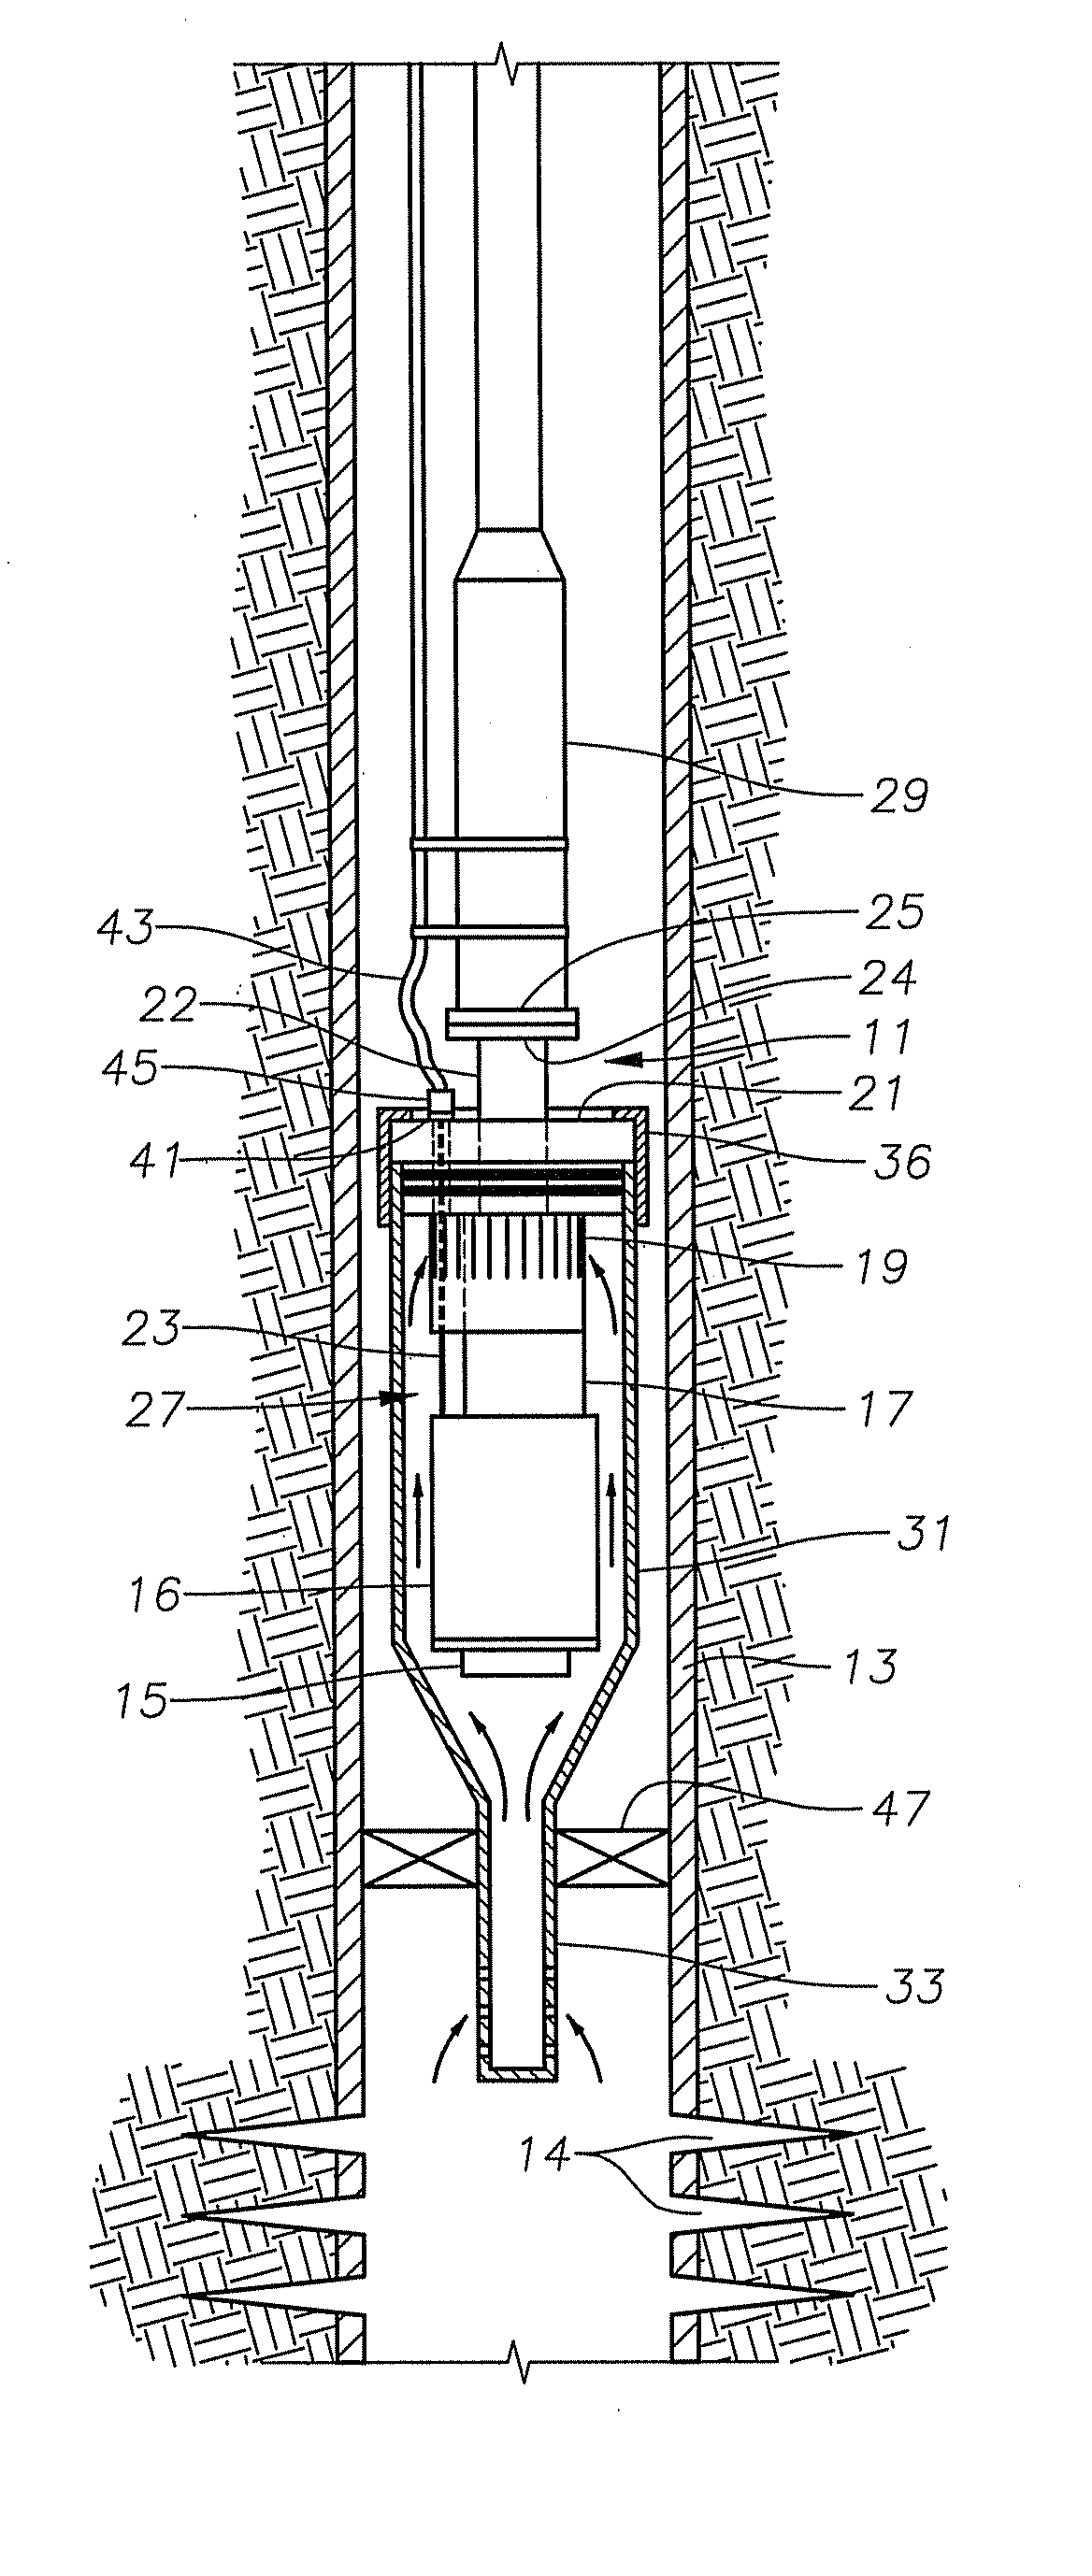 Intake For Shrouded Electric Submersible Pump Assembly